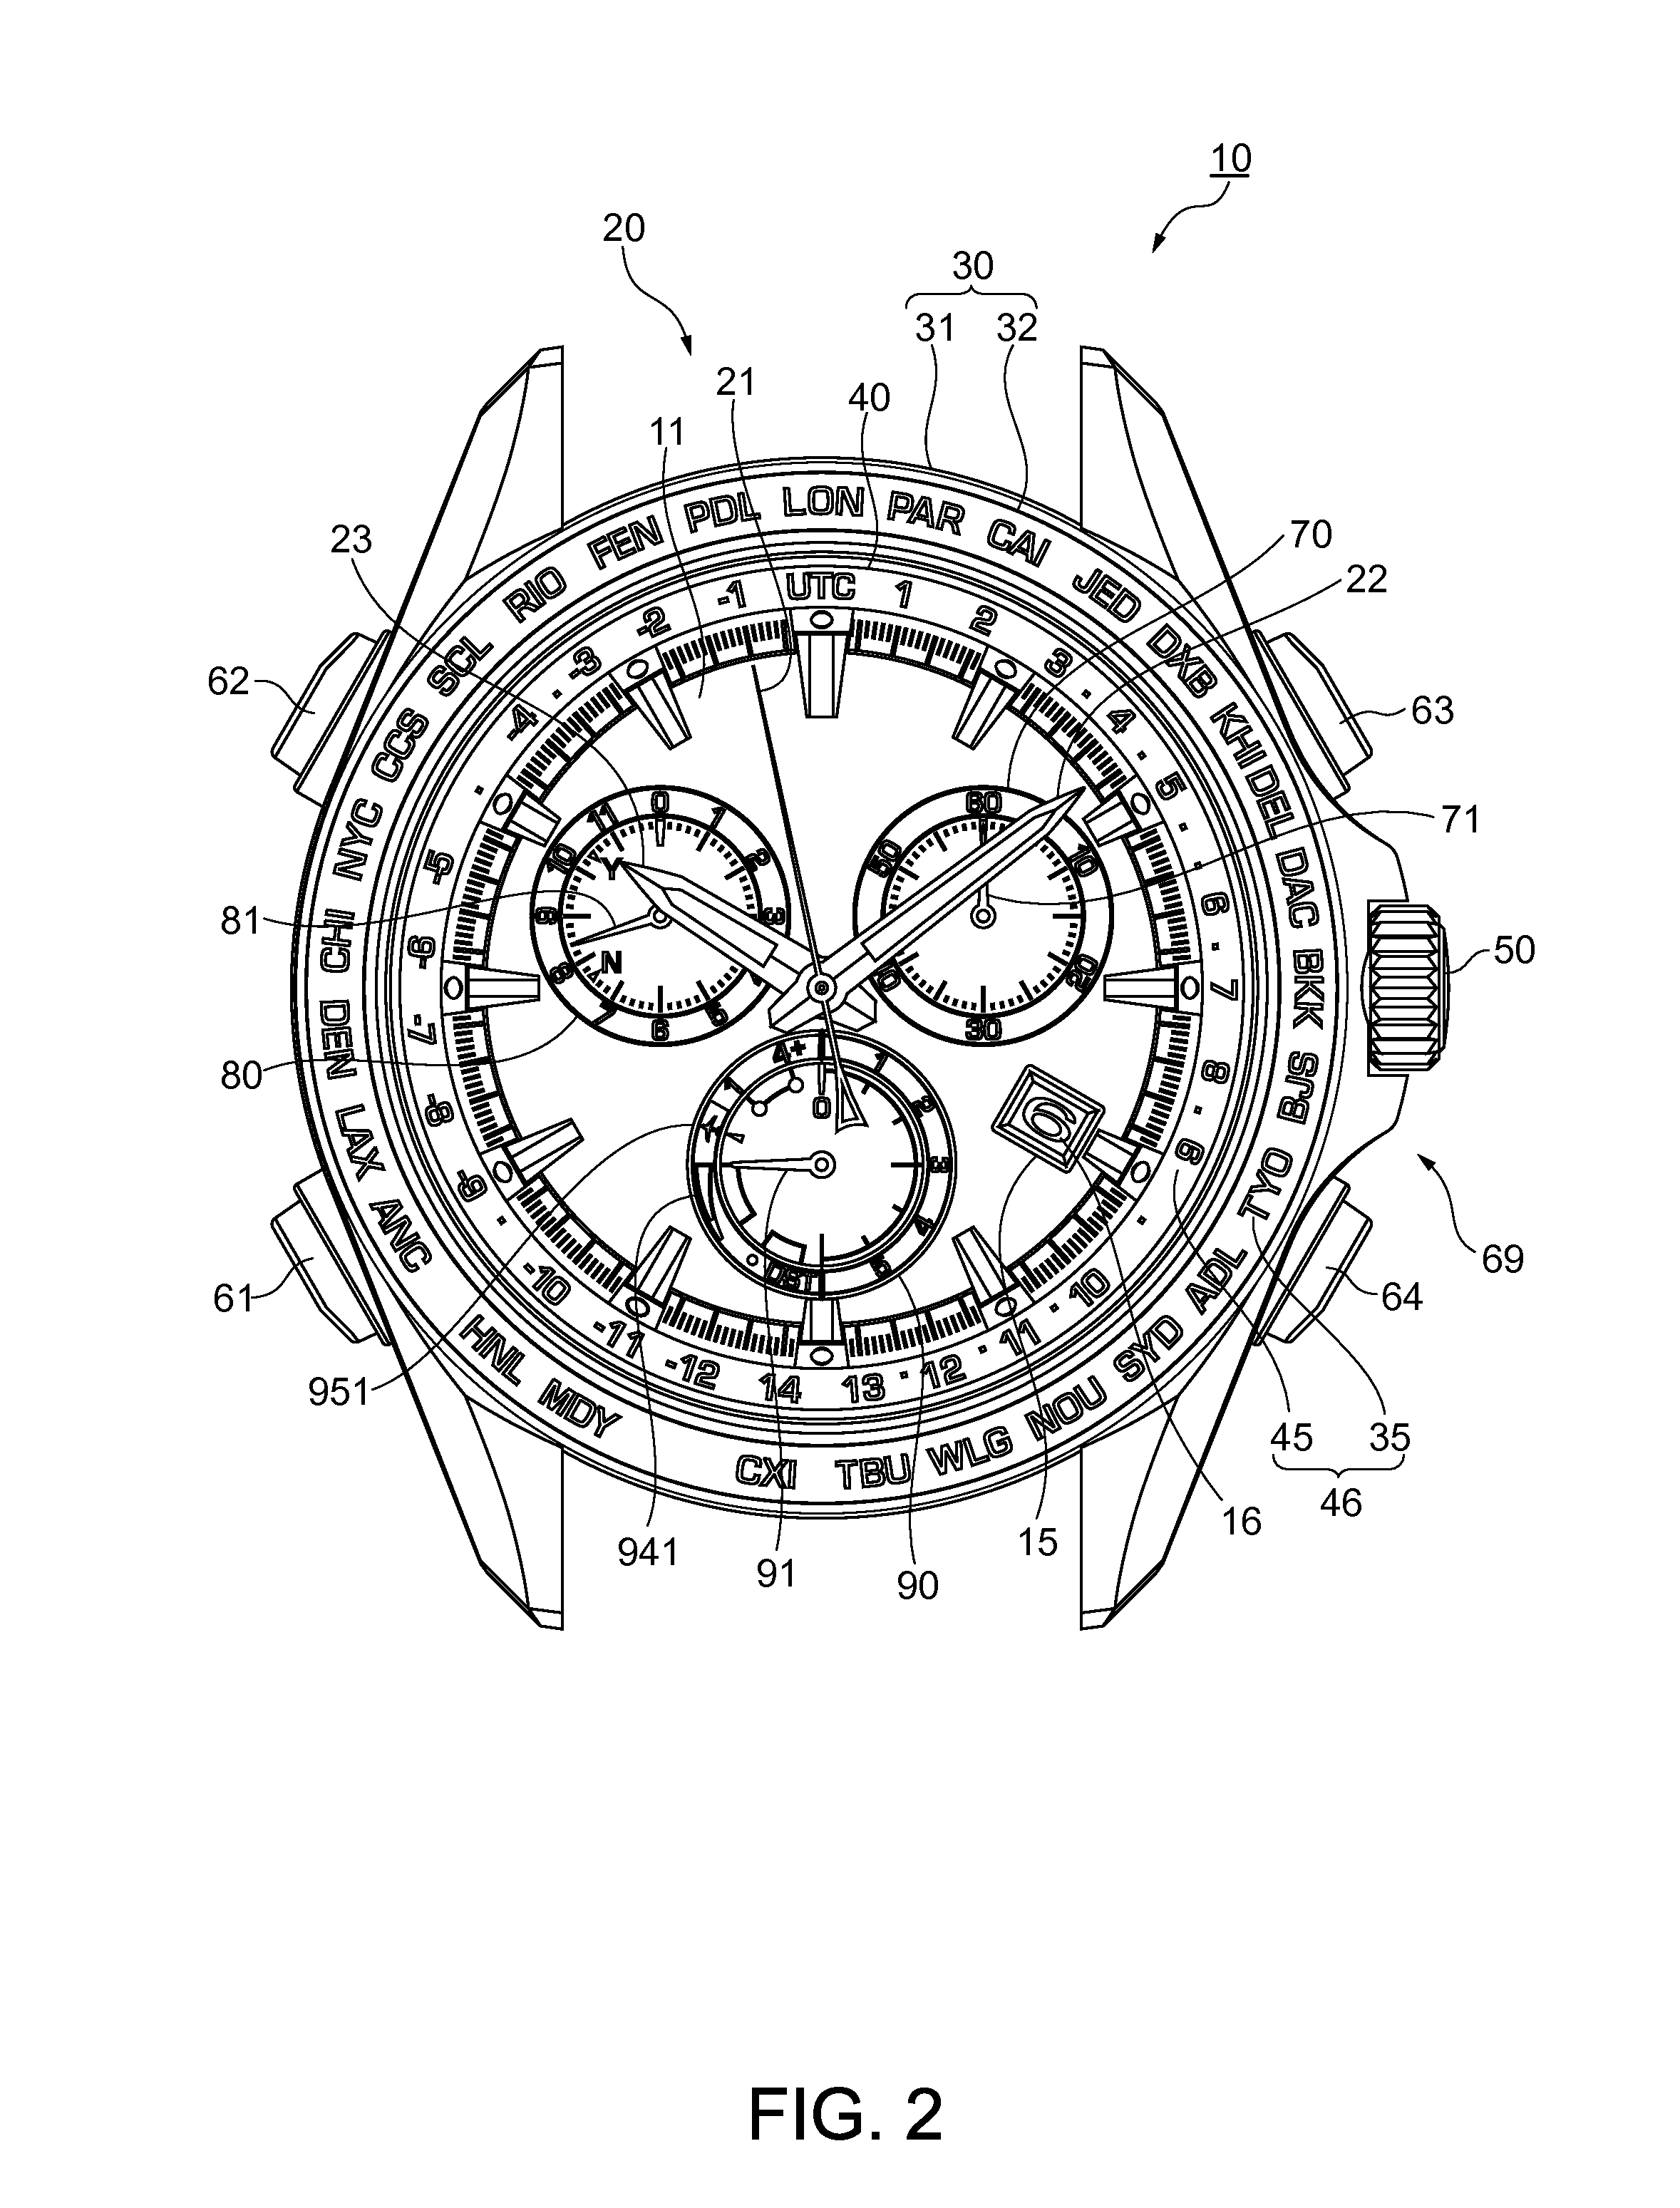 Electronic Timepiece and Movement